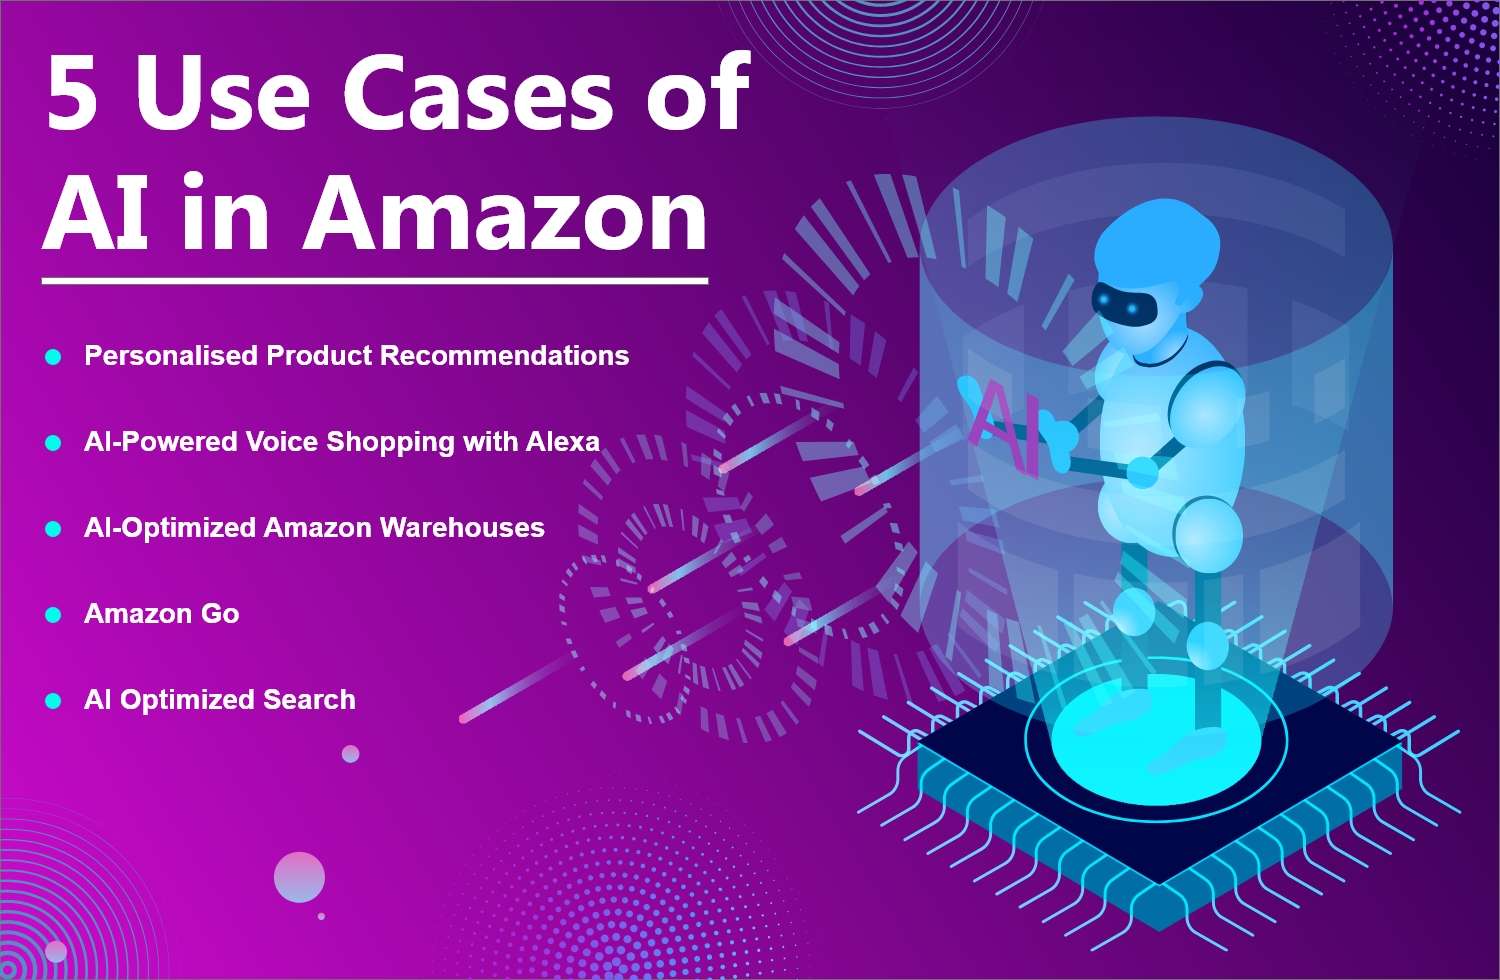 5 Use Cases of AI in Amazon